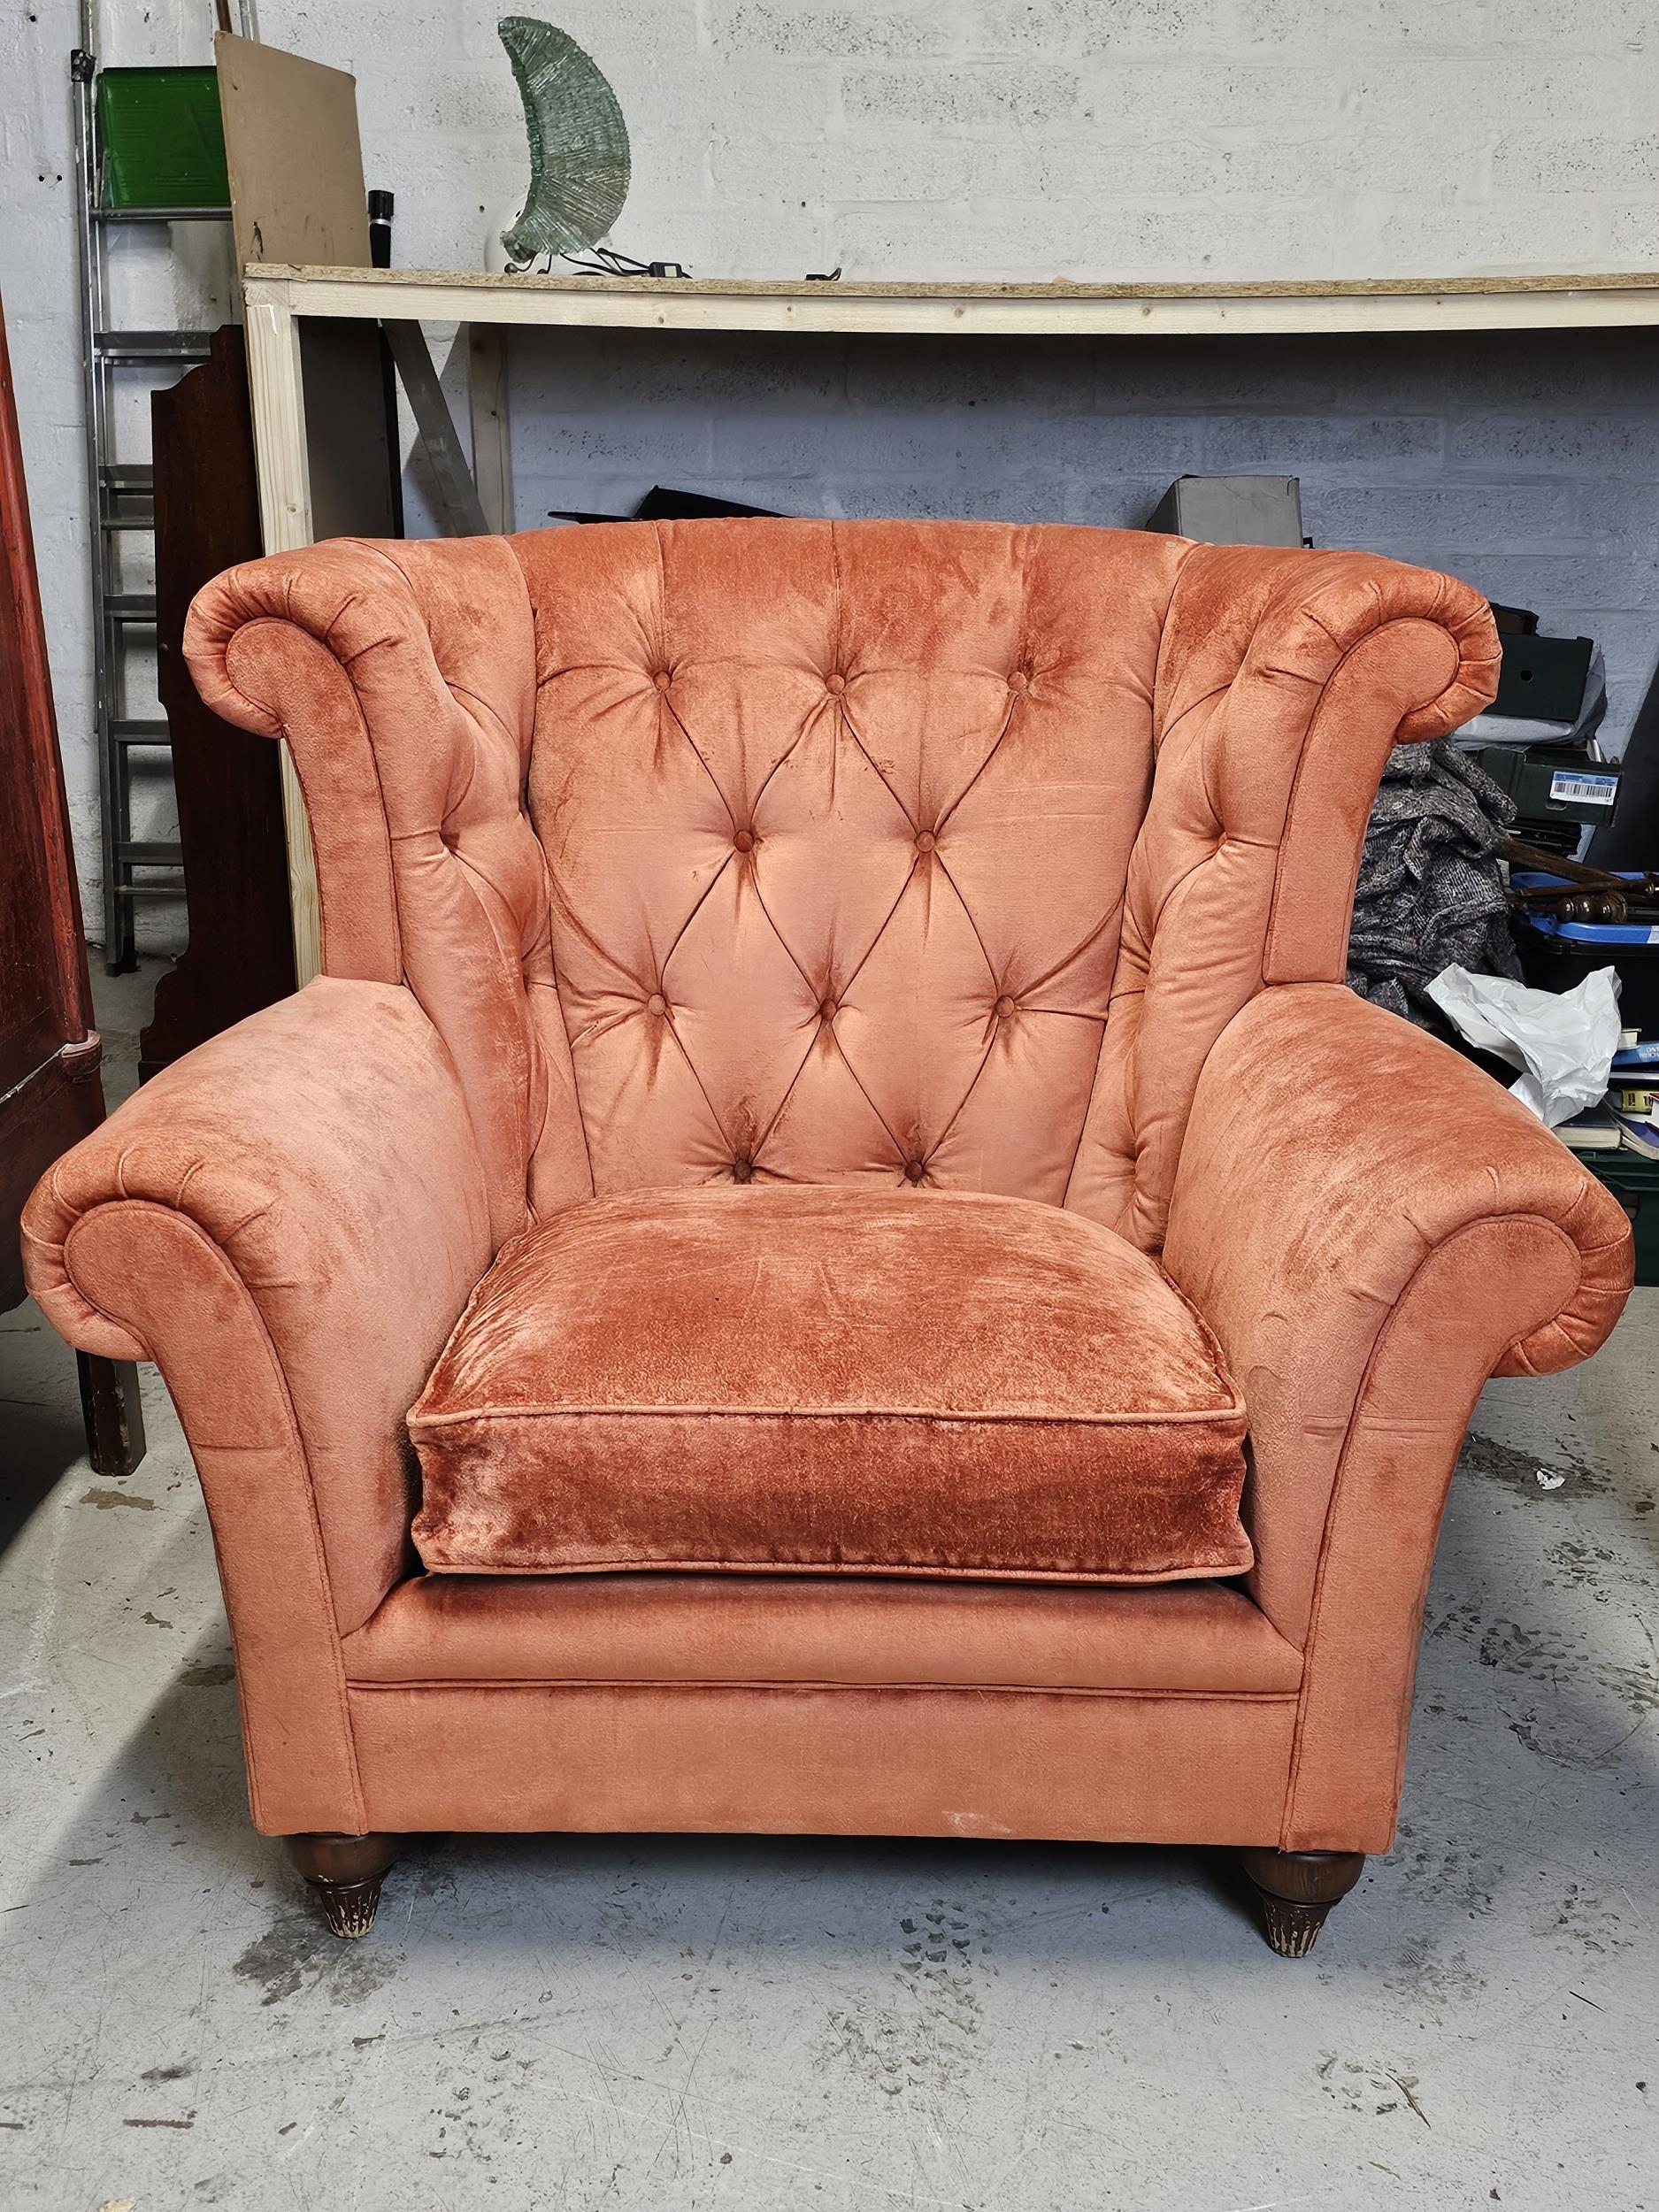 An outsize wing back armchair in deep buttoned upholstery.